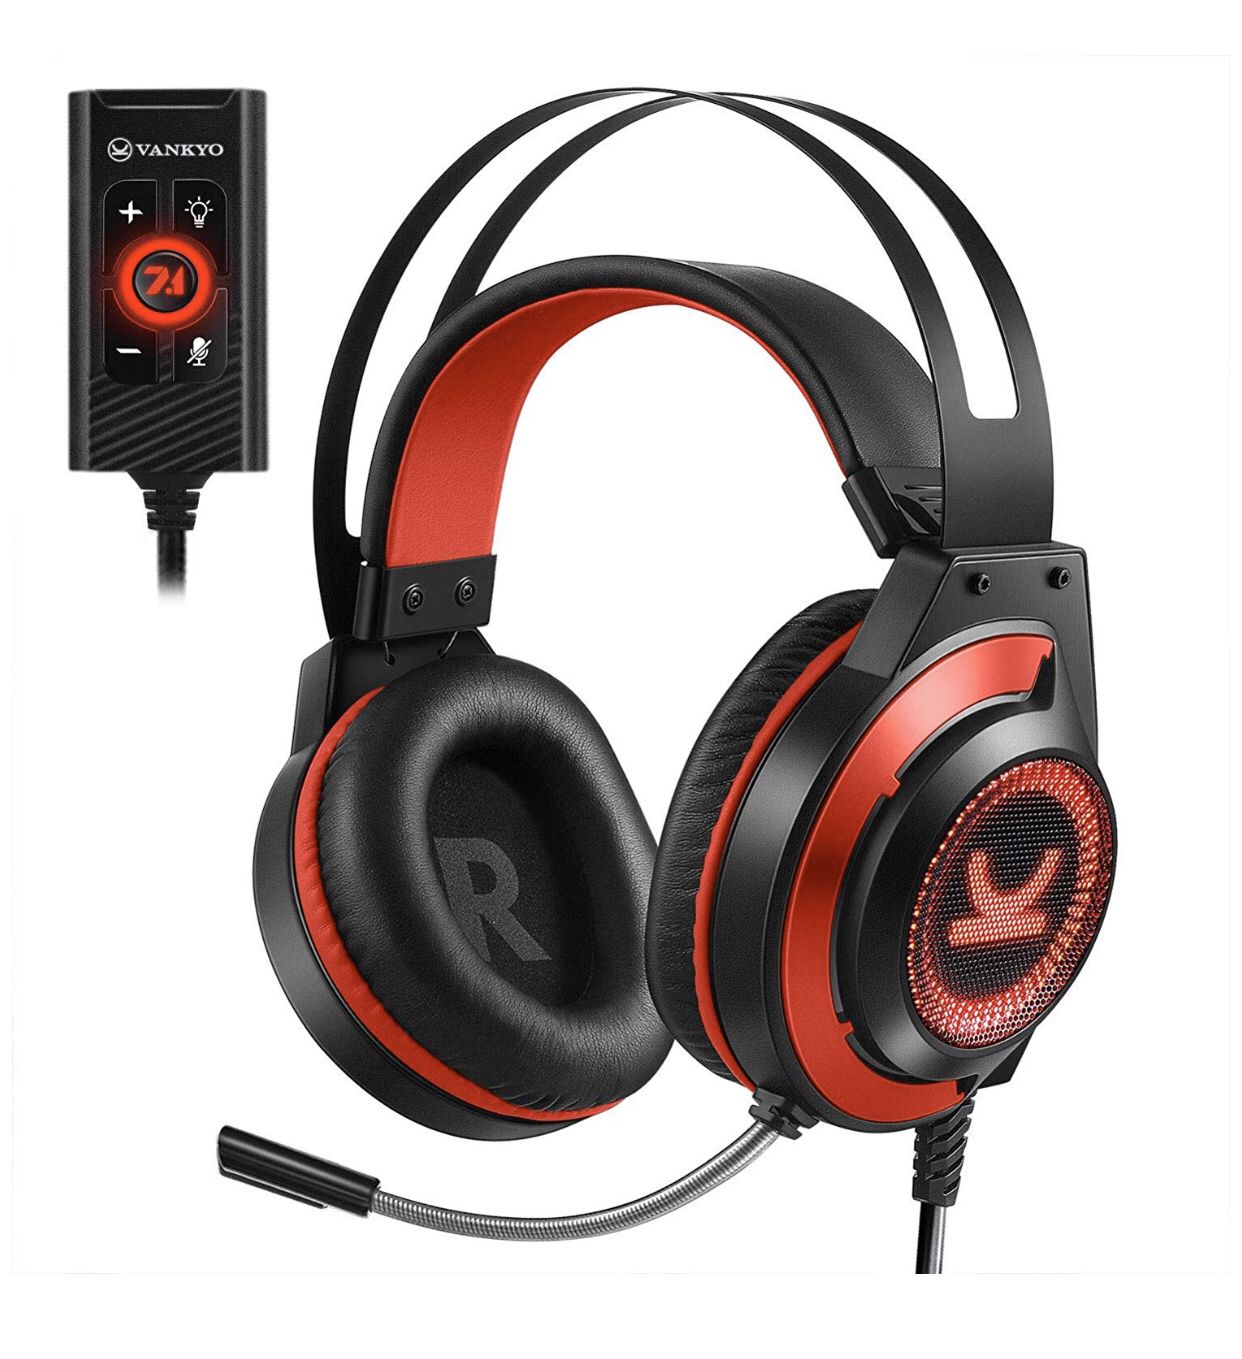 VANKYO CM7000 Pro Gaming Headset PS4 headset with 7.1 Surround Sound Stereo Xbox One Headset, Gaming Headphones with Noise Canceling Mic & Memory Foa